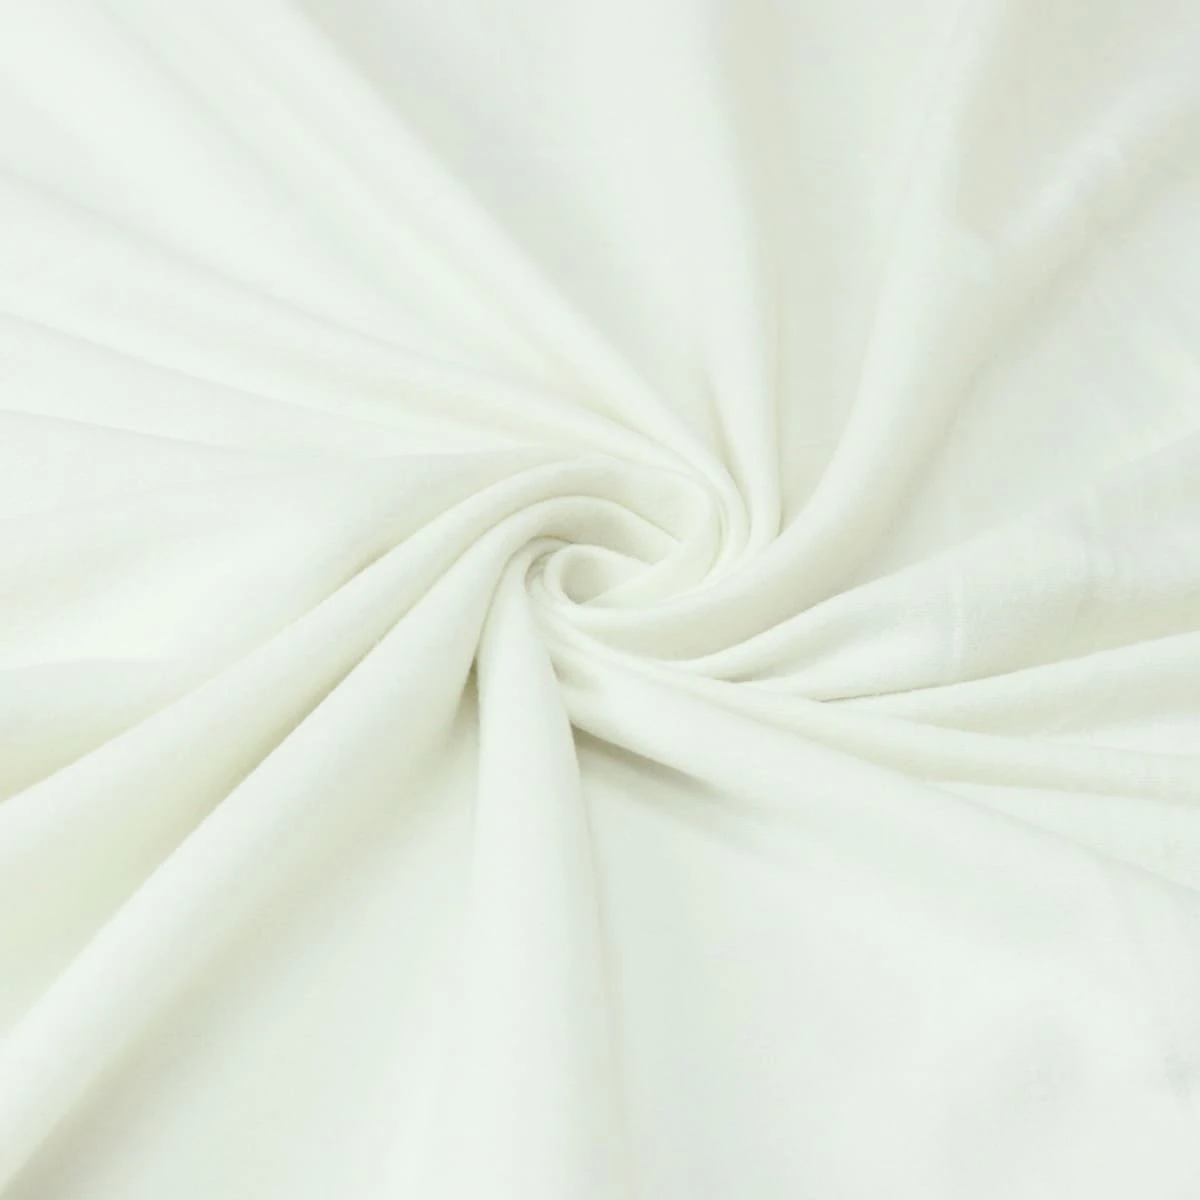 Solid Color Fleece Throw (Cream) - Whipstitch Edging